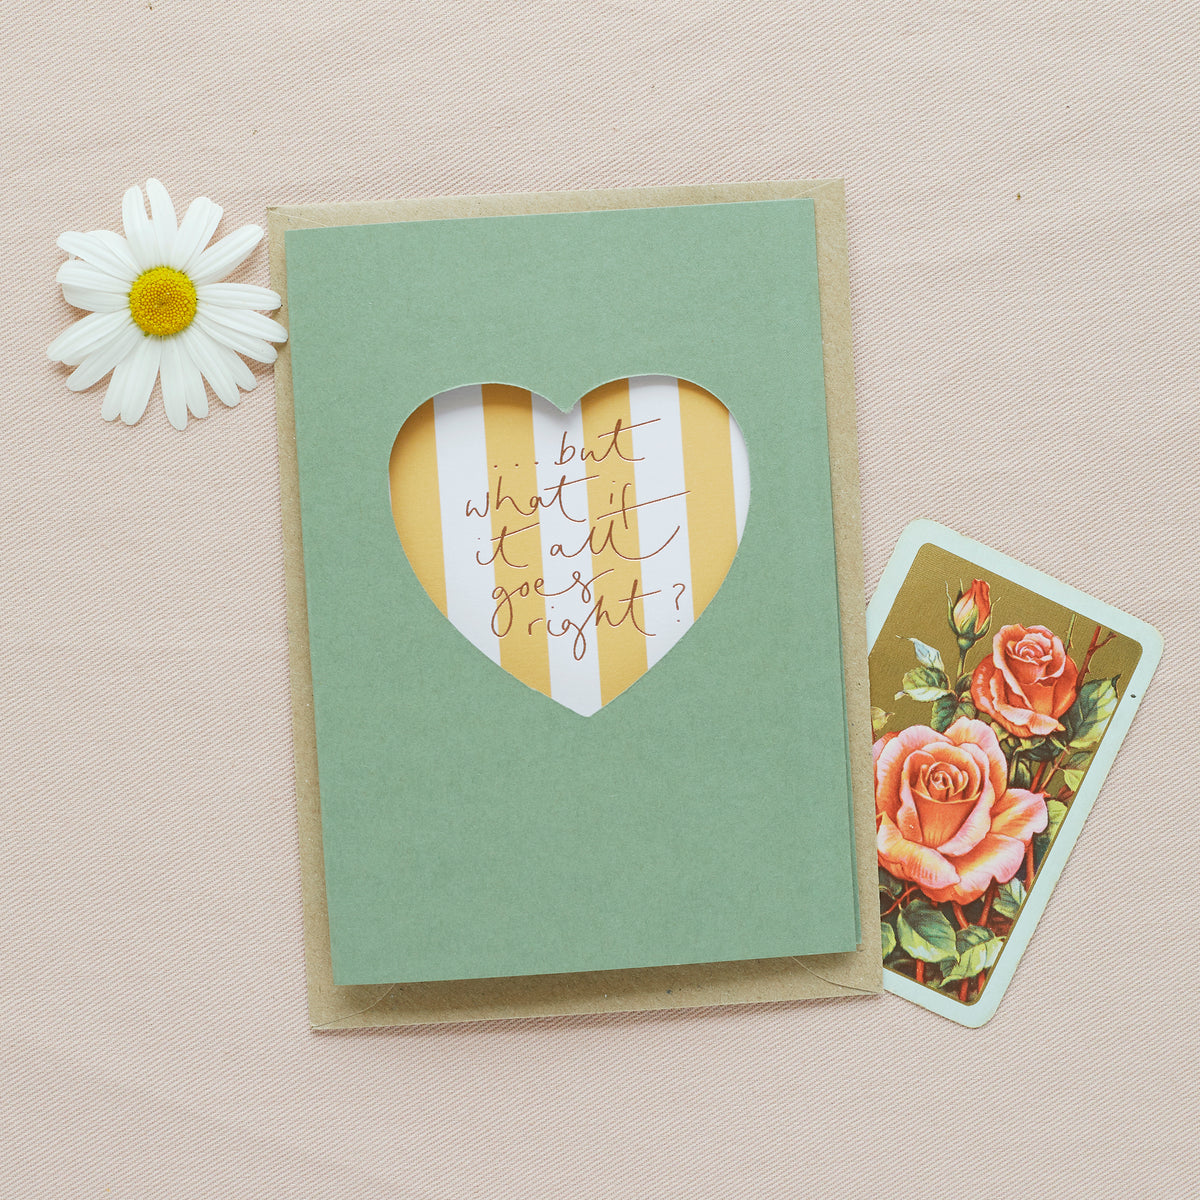 ‘…but what if it all goes right?’ Green Cut Out Heart Card